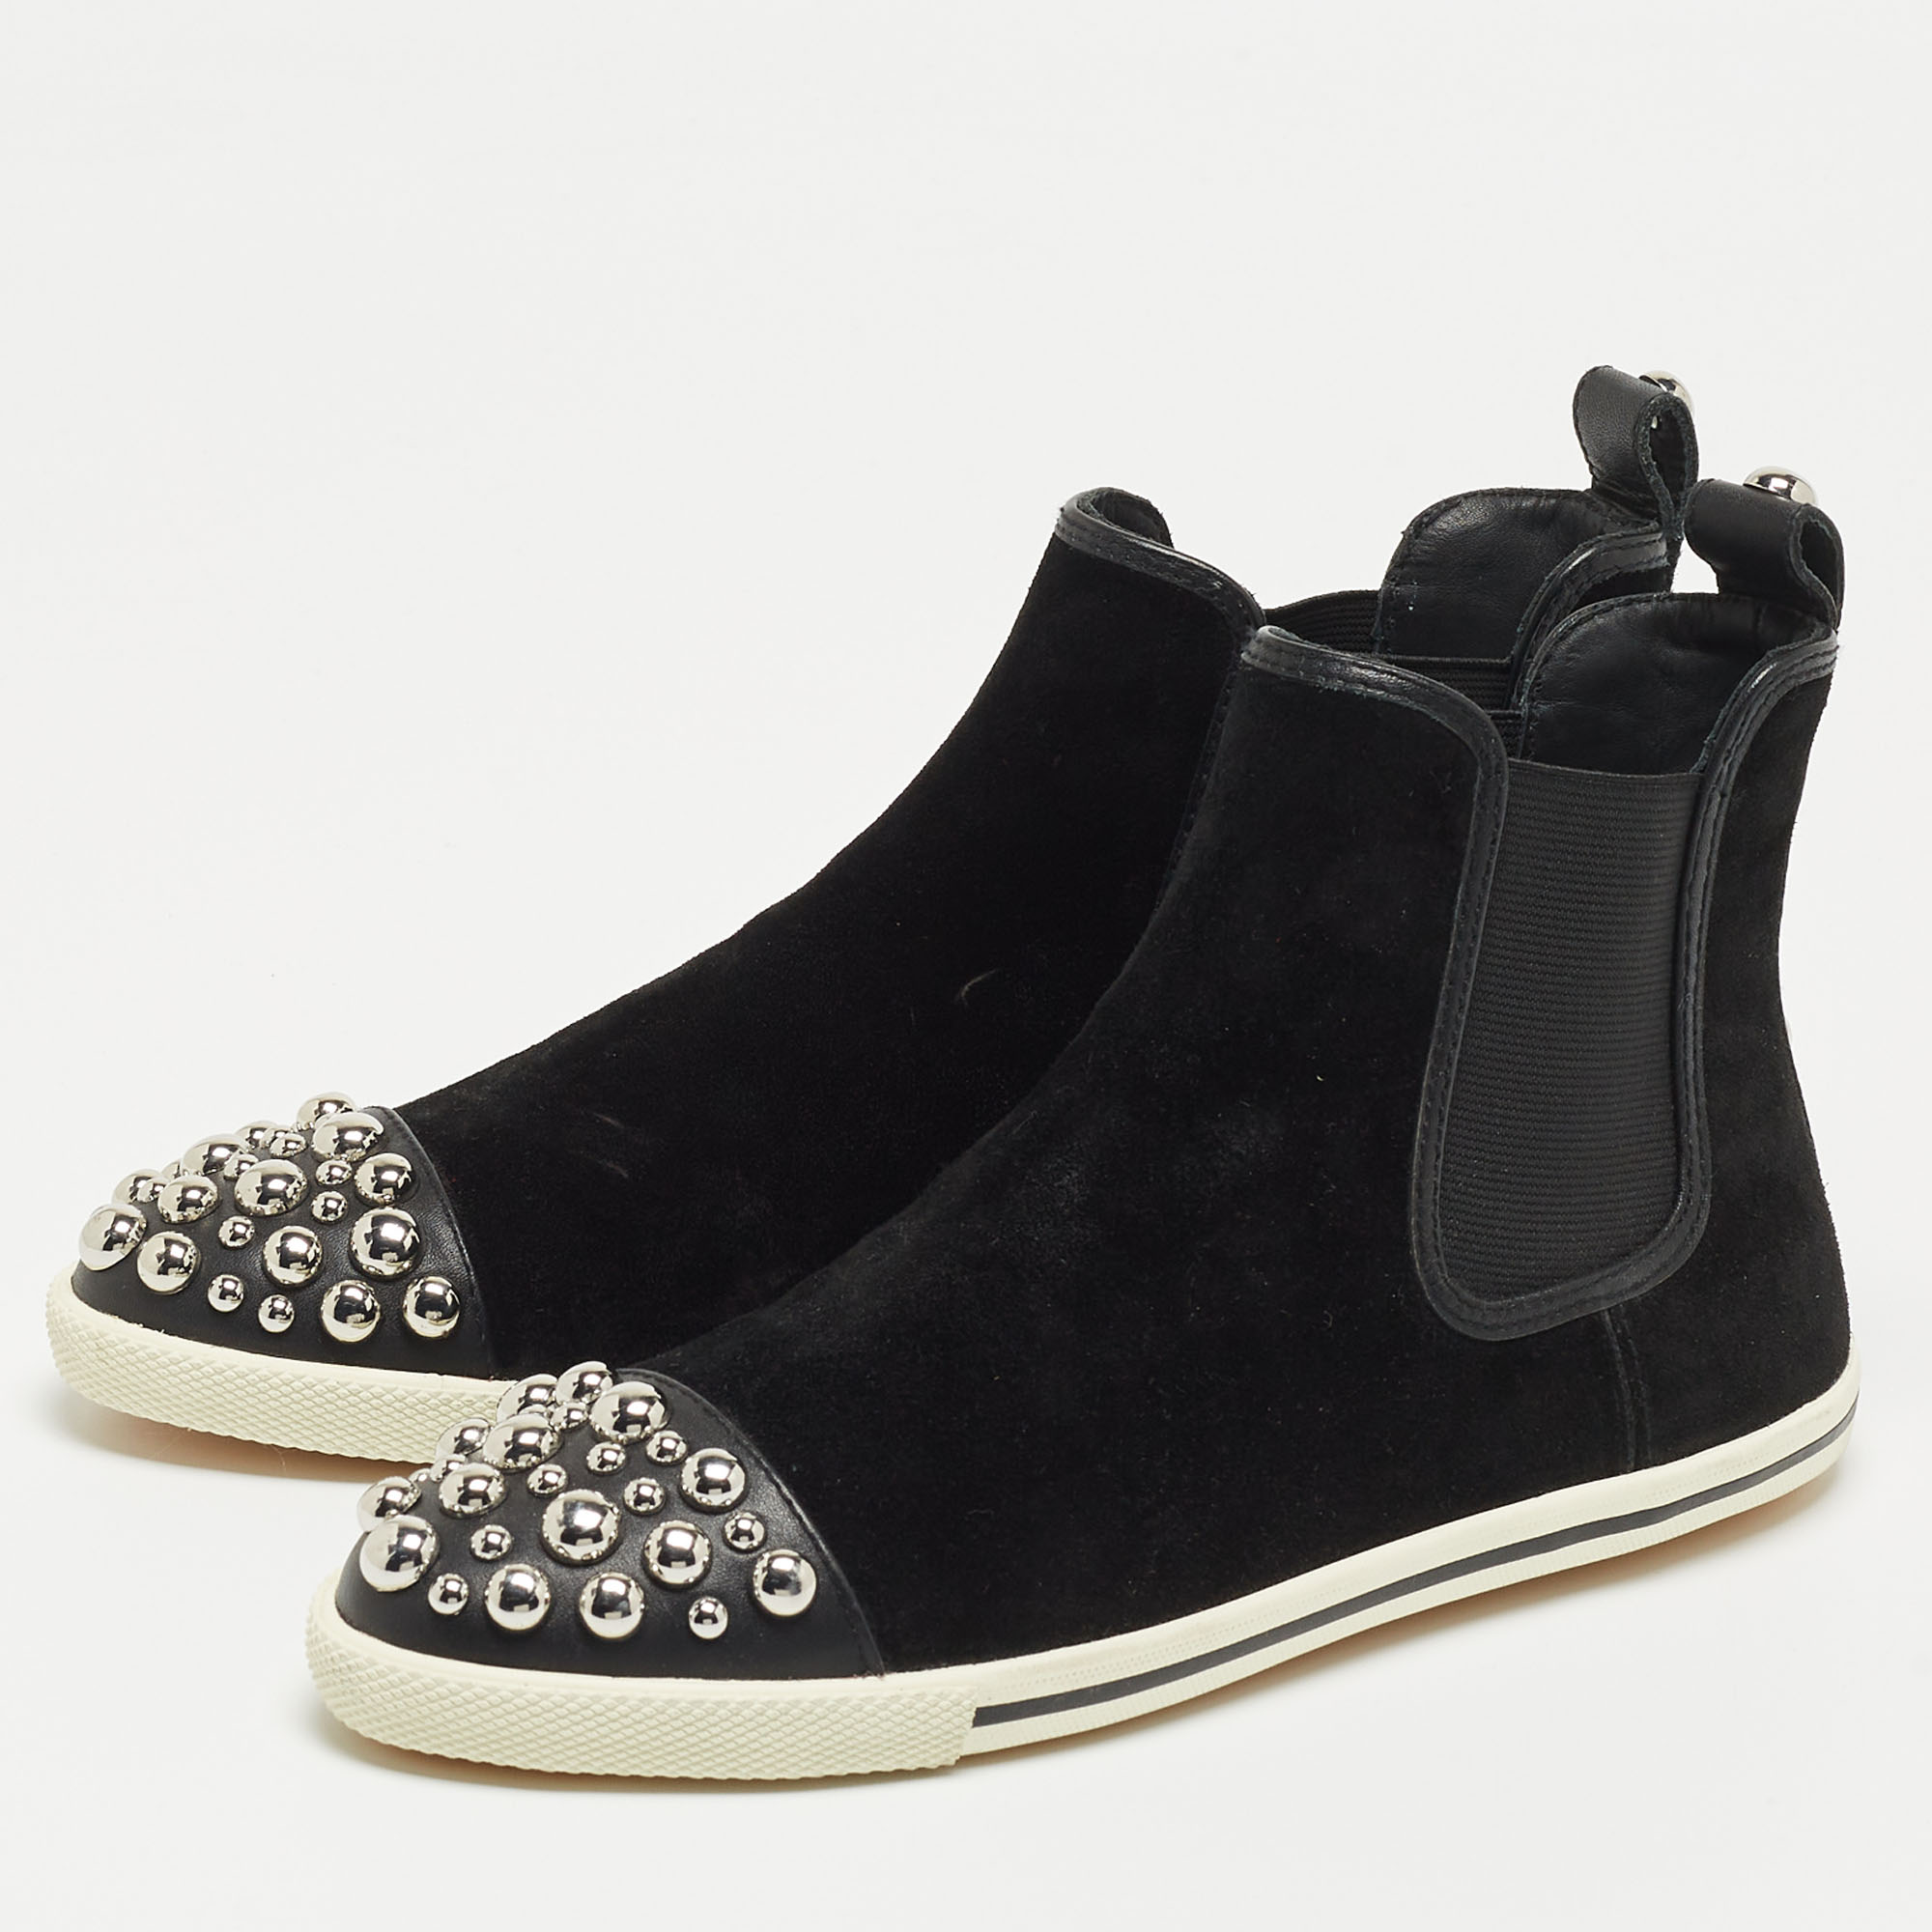 

Marc by Marc Jacobs Black Suede and Leather Studded High Top Sneakers Size